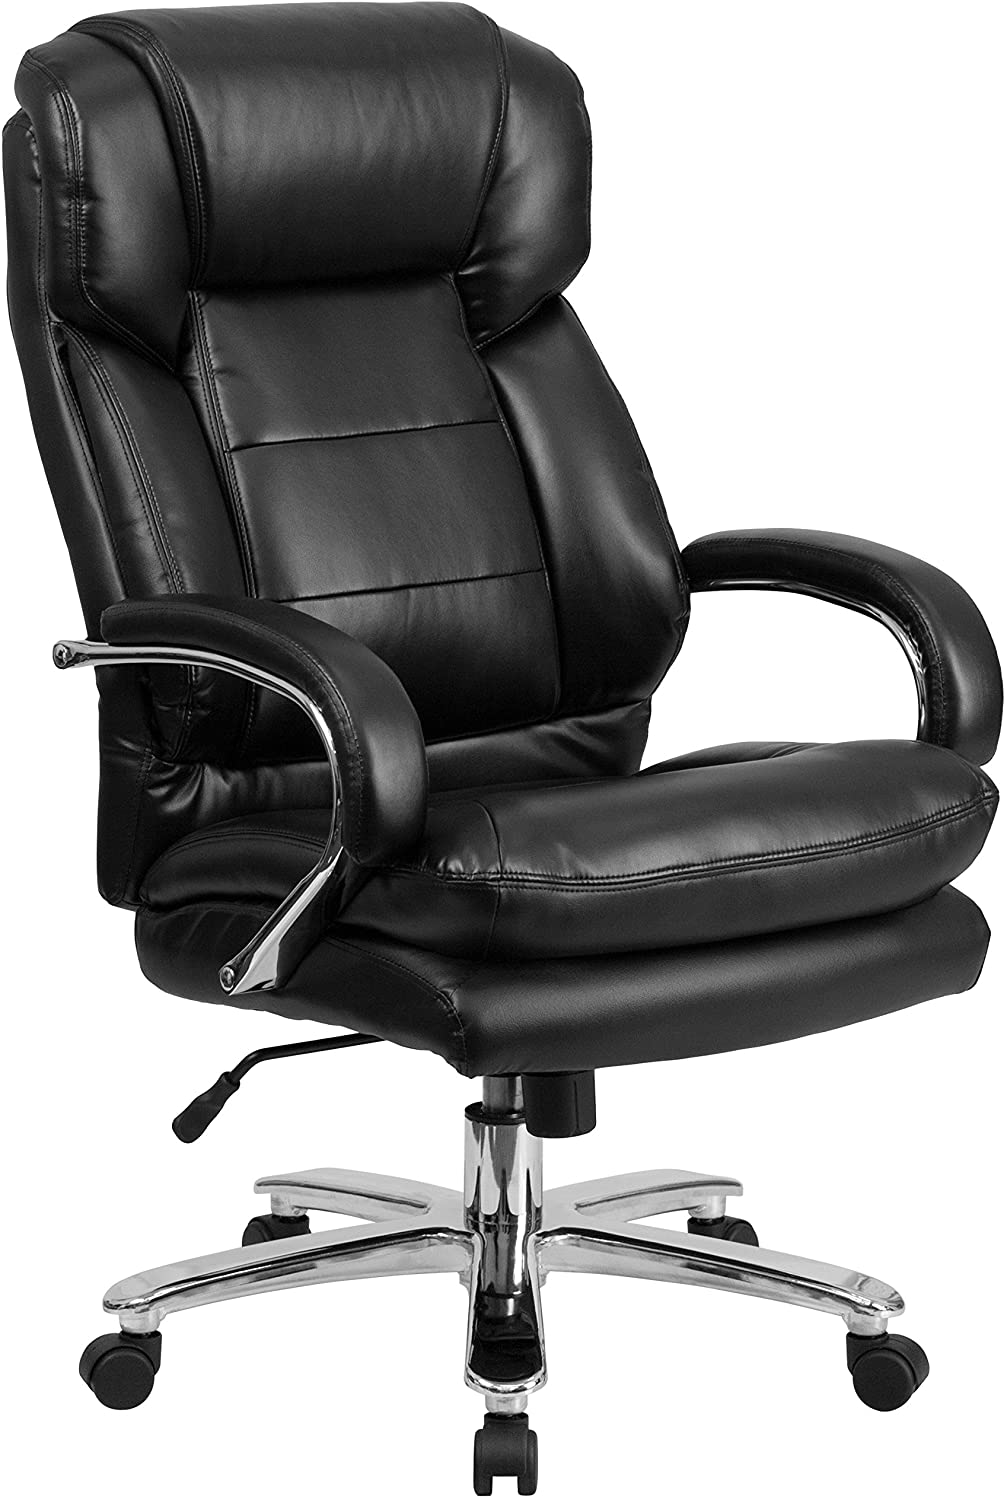 Flash-Furniture-Big-Tall-Office-Chair-Leather-Swivel-Executive-Desk-Chair-with-Wheels